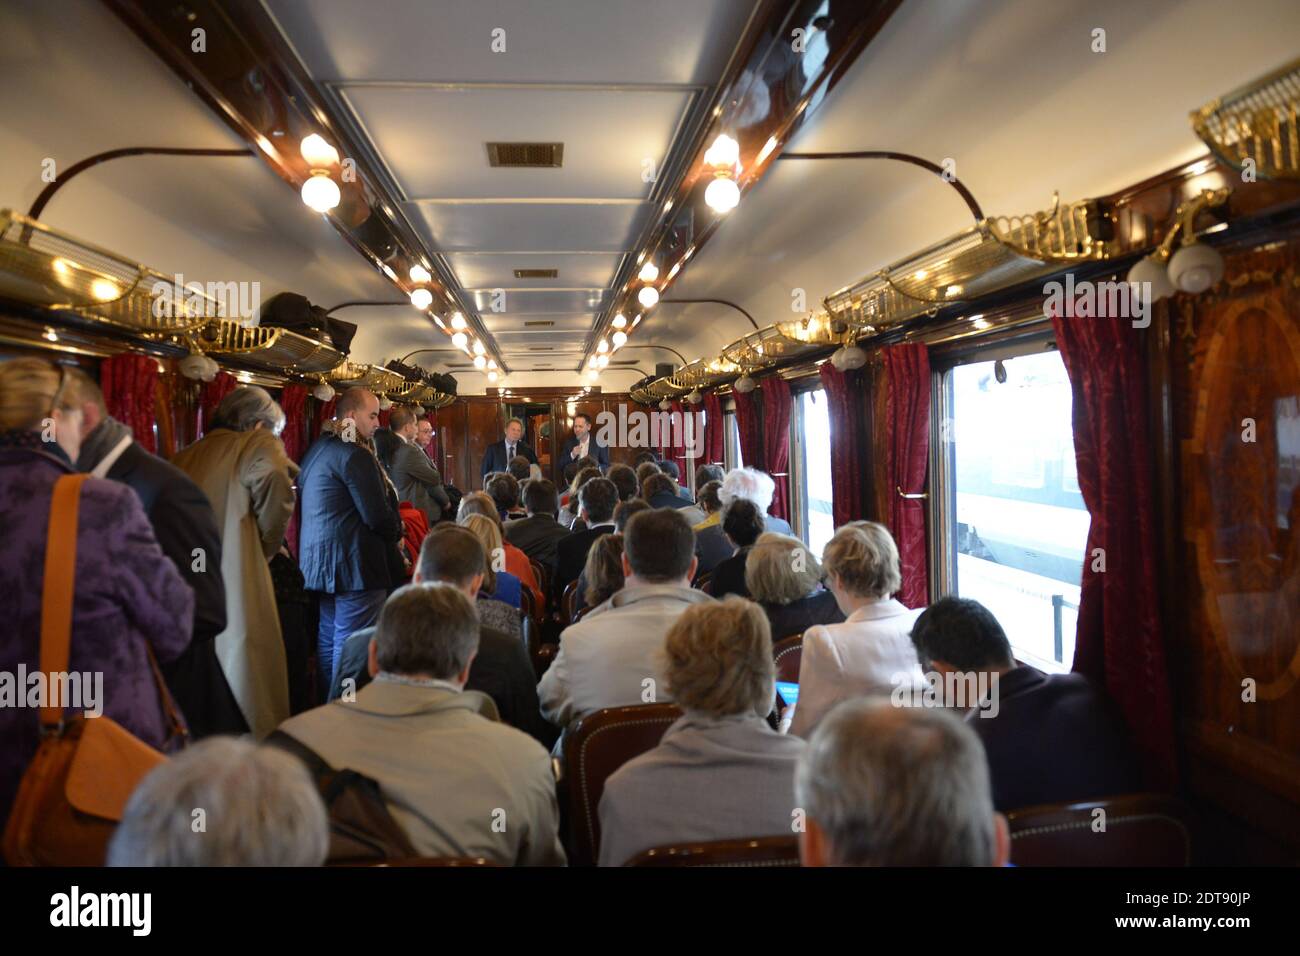 Once Upon a Time on the Orient Express - the exhibition